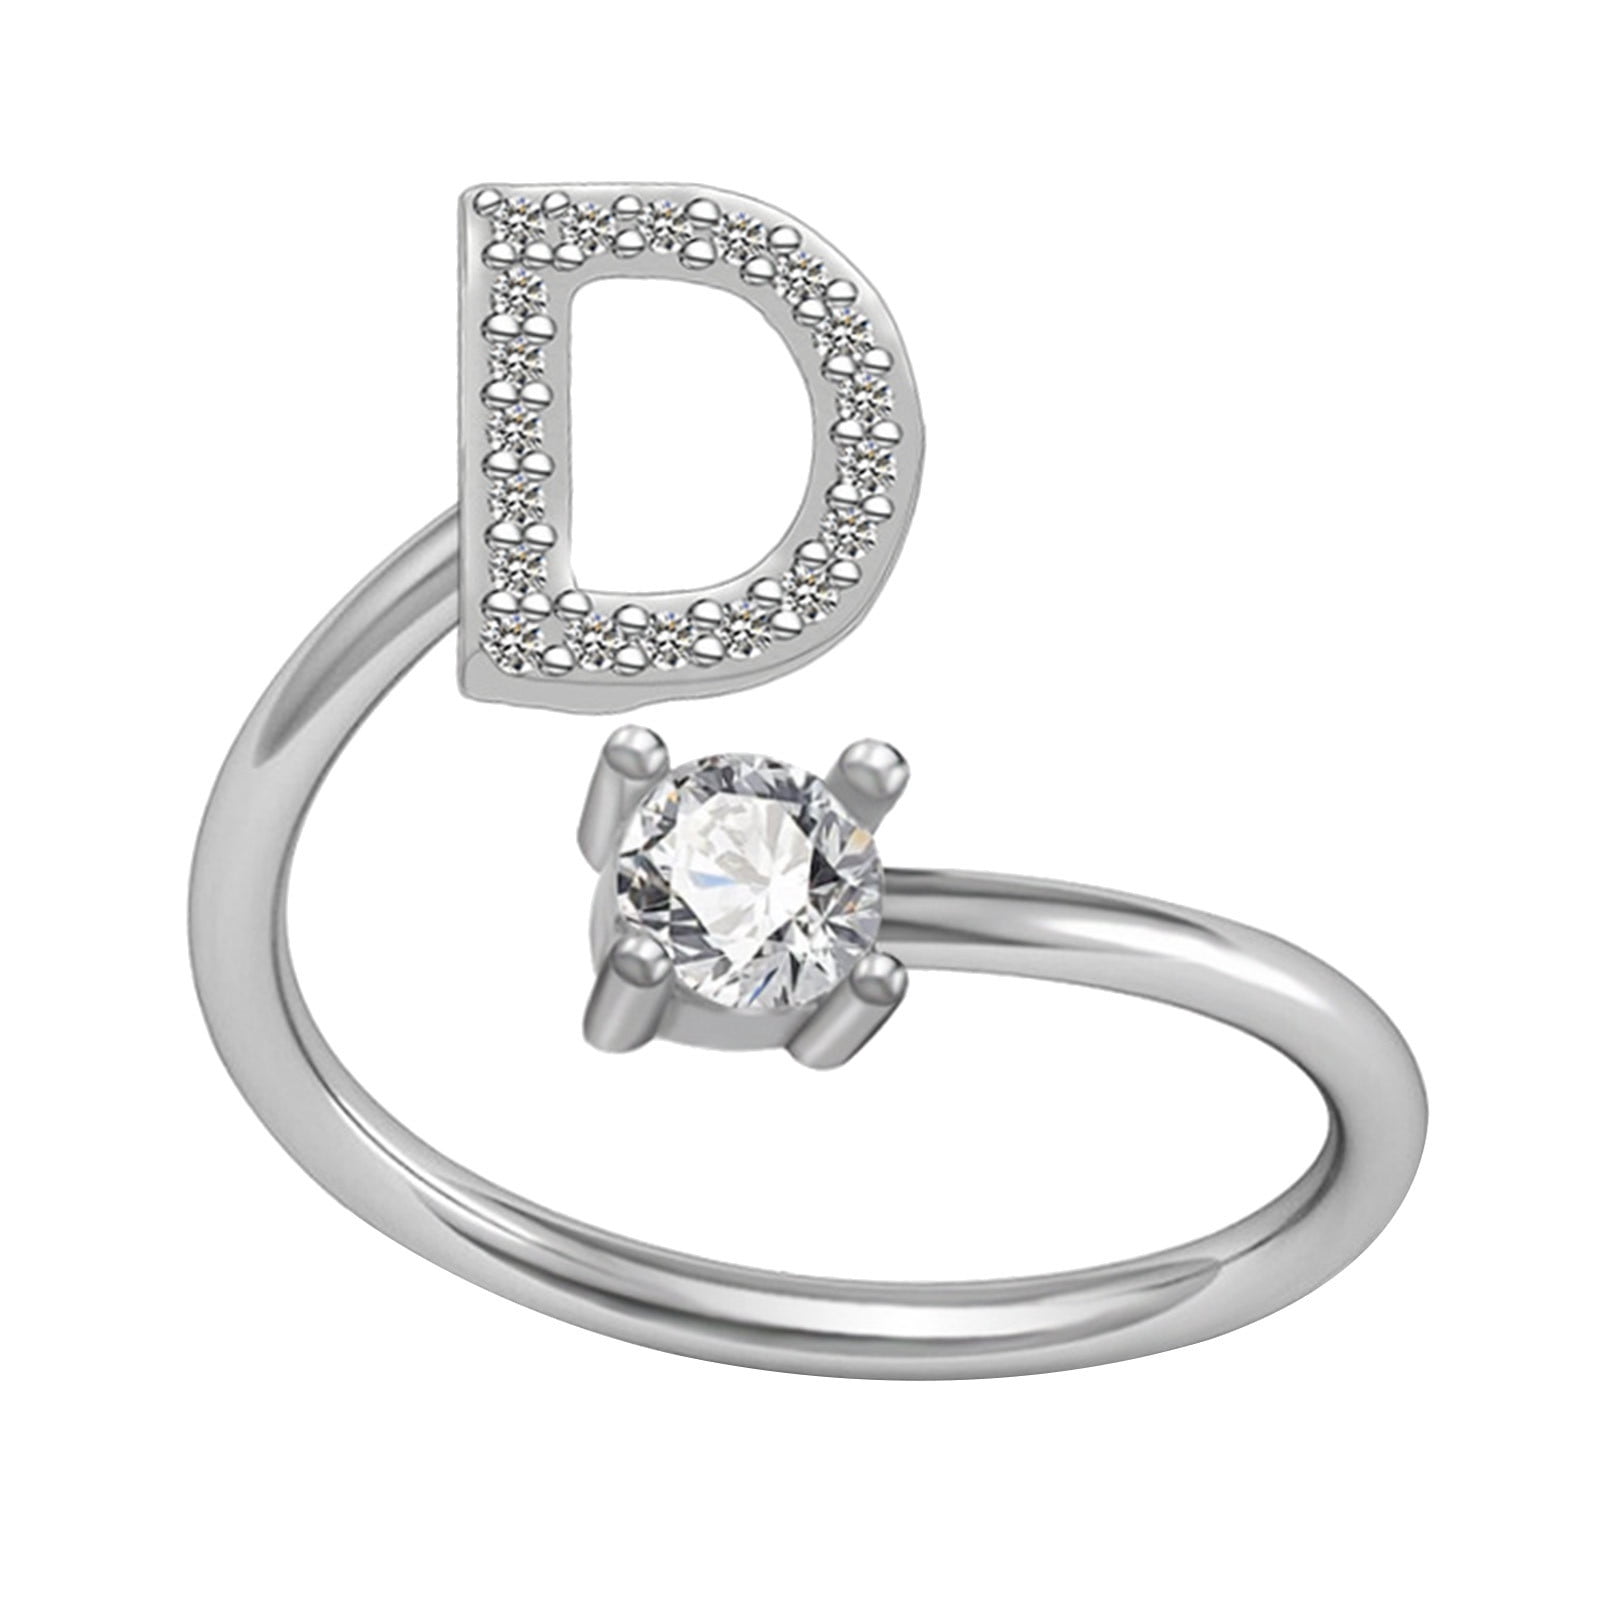 Princess Kylie Clear Pave Set Cubic Zirconia Square Shaped Ring Rhodium Plated Sterling Silver